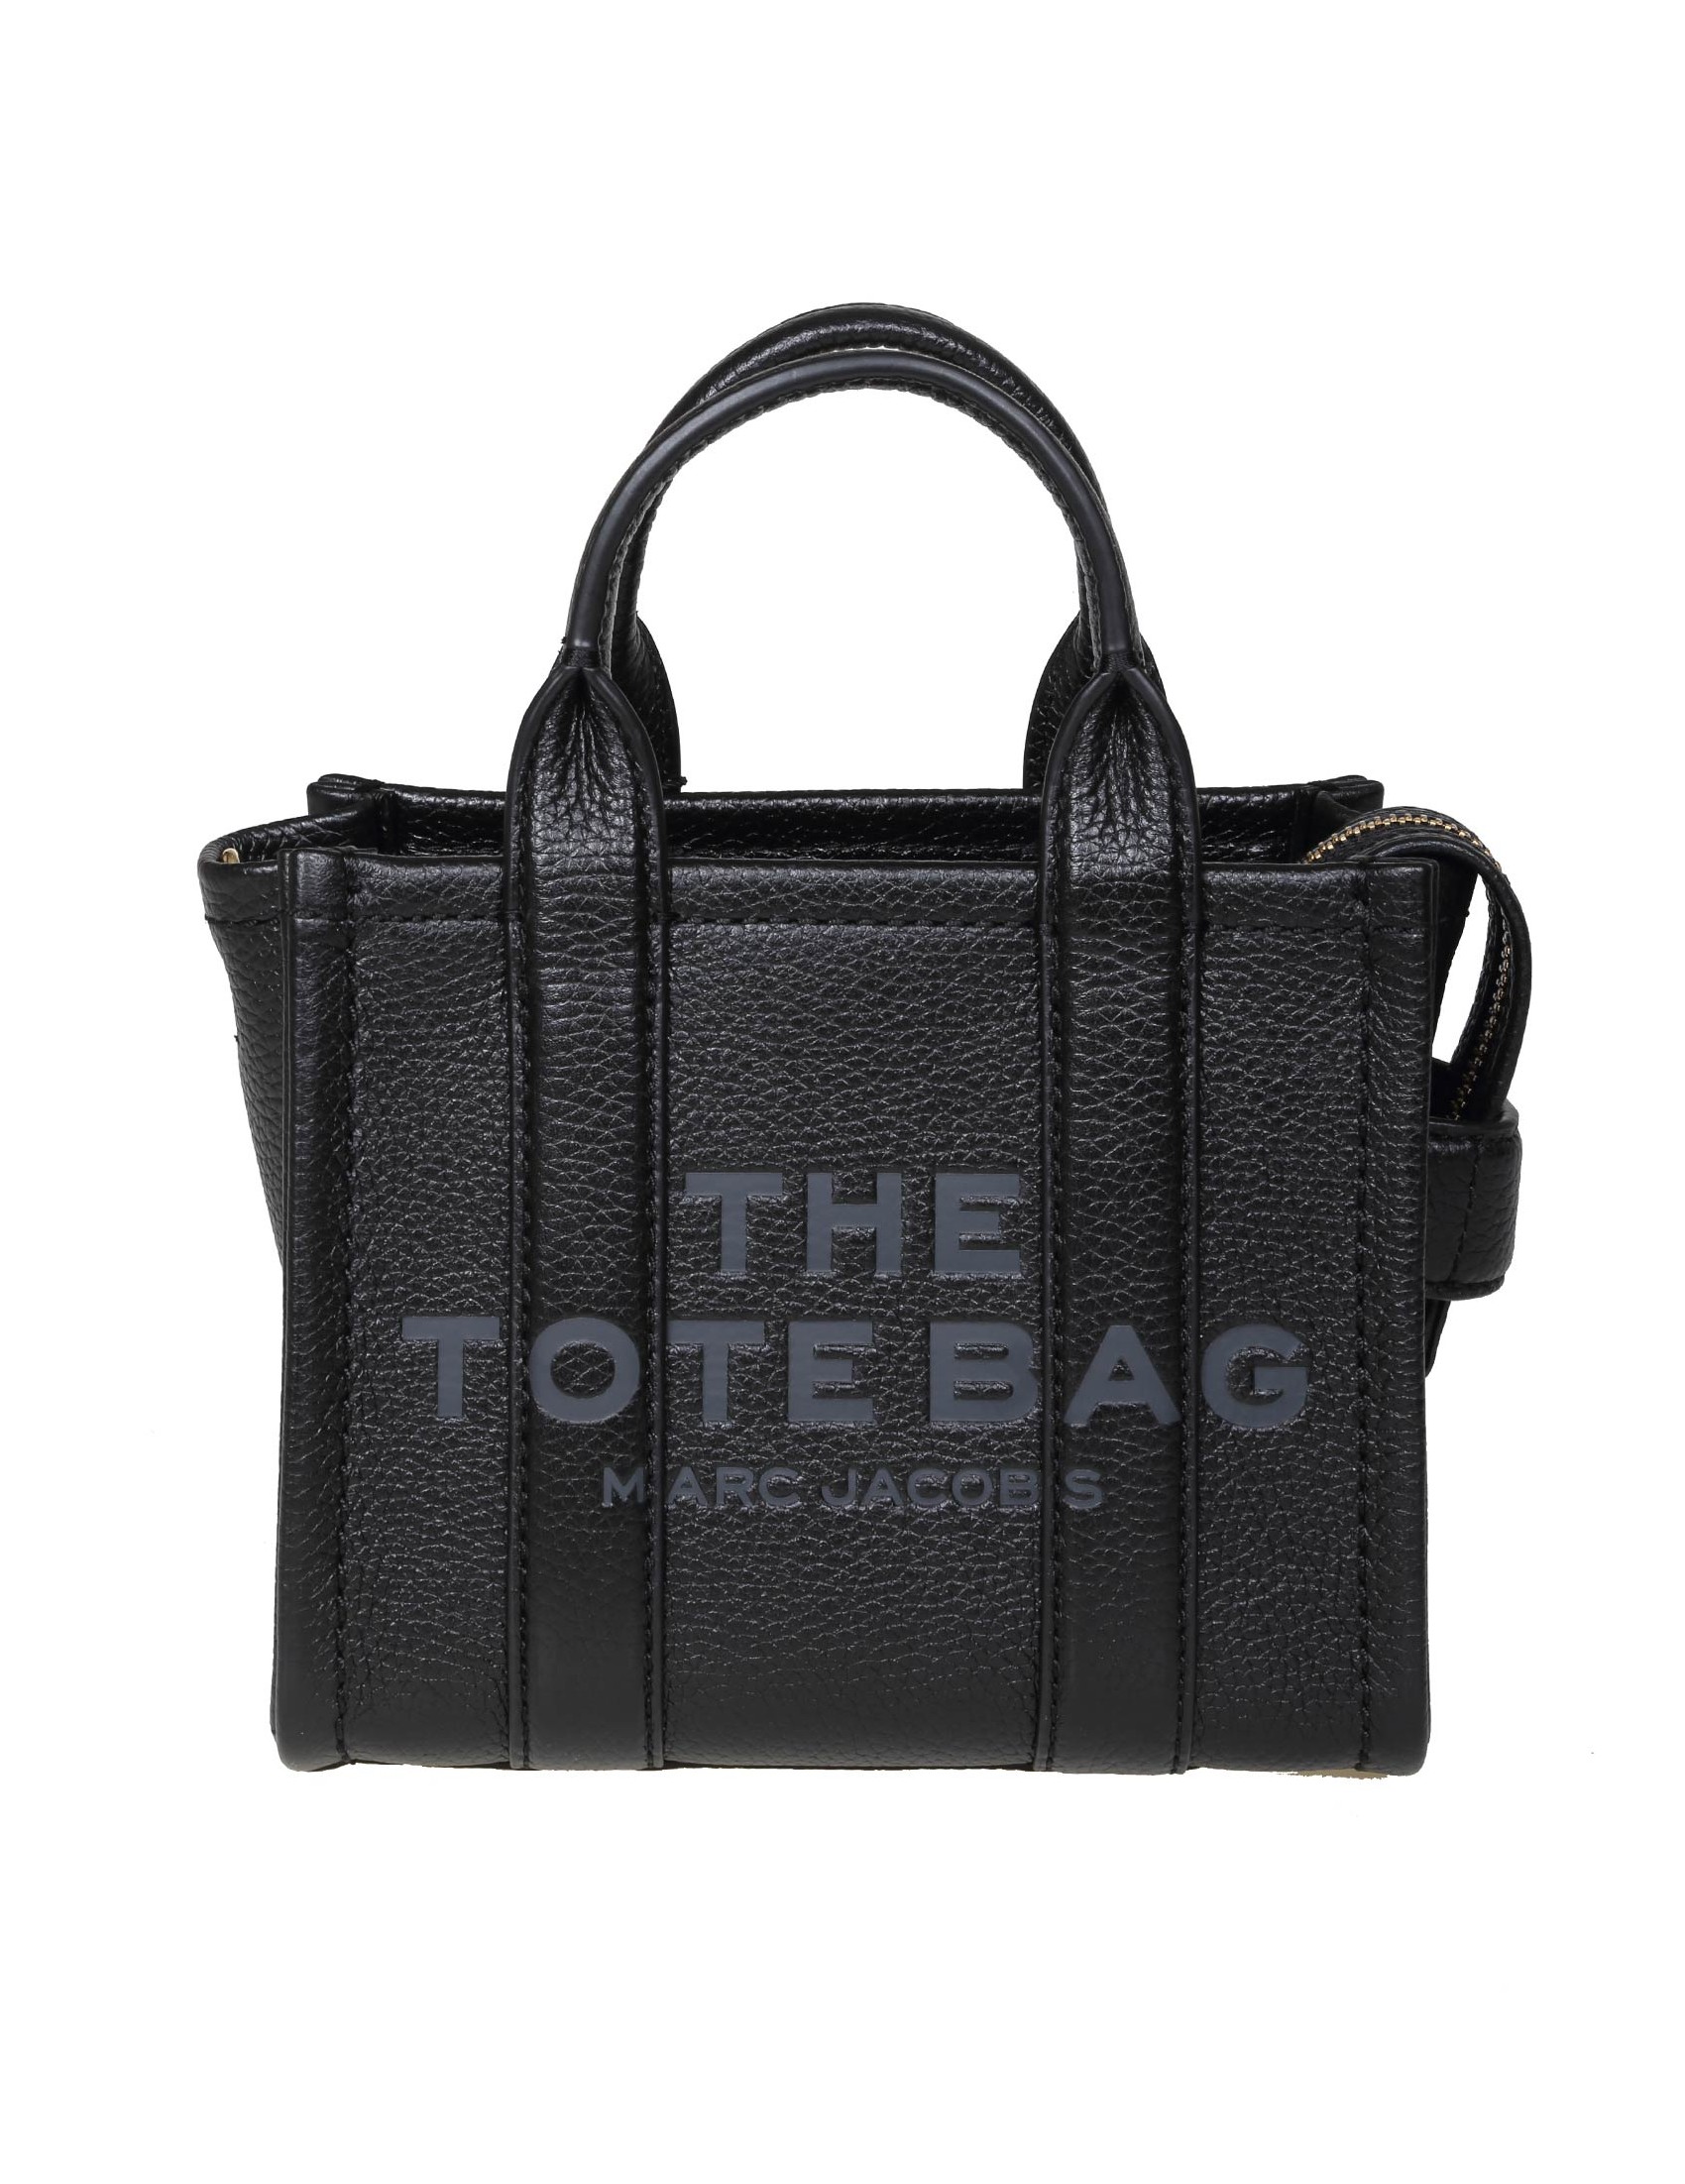 MARC JACOBS SMALL TOTE IN BLACK LEATHER